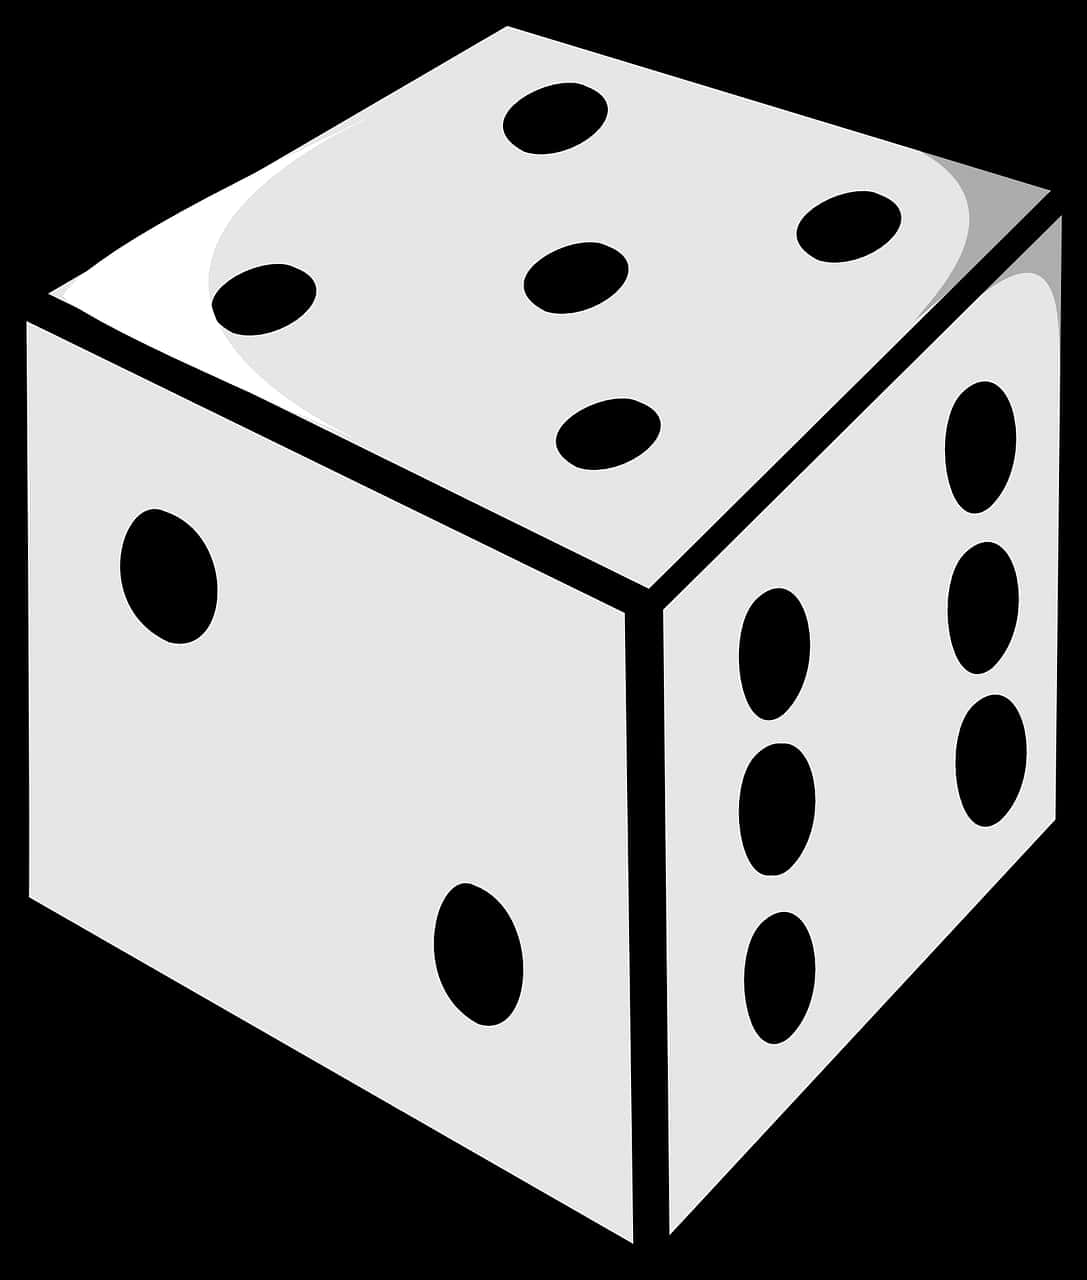 Classic Blackand White Dice Illustration PNG